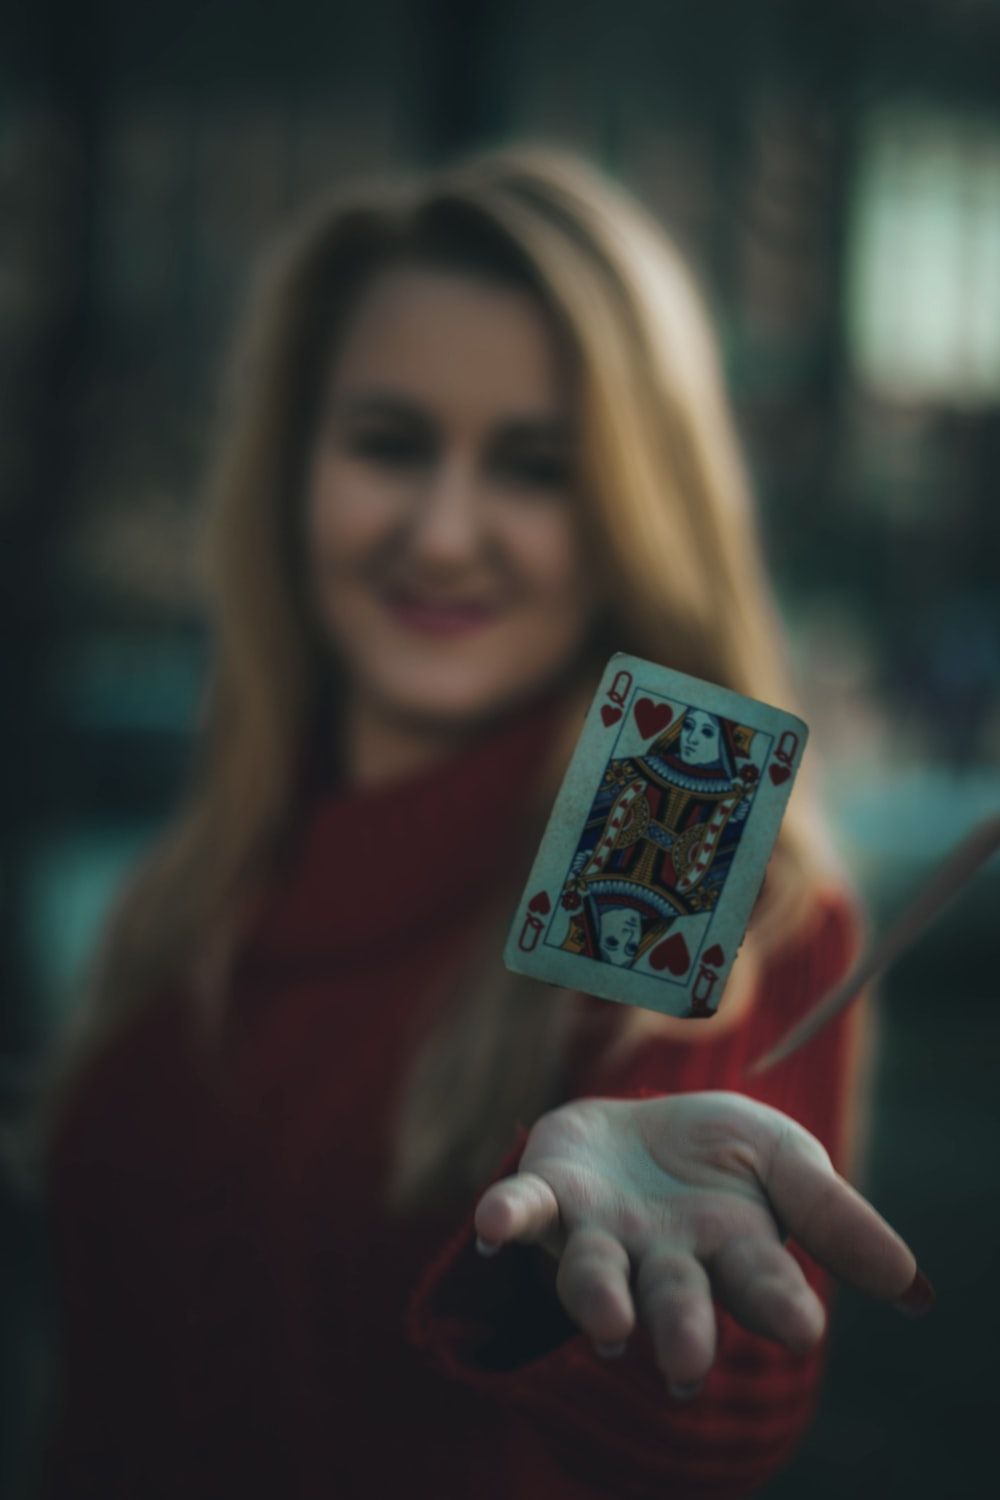 time lapse photo of queen of hearts playing card near woman's palm photo